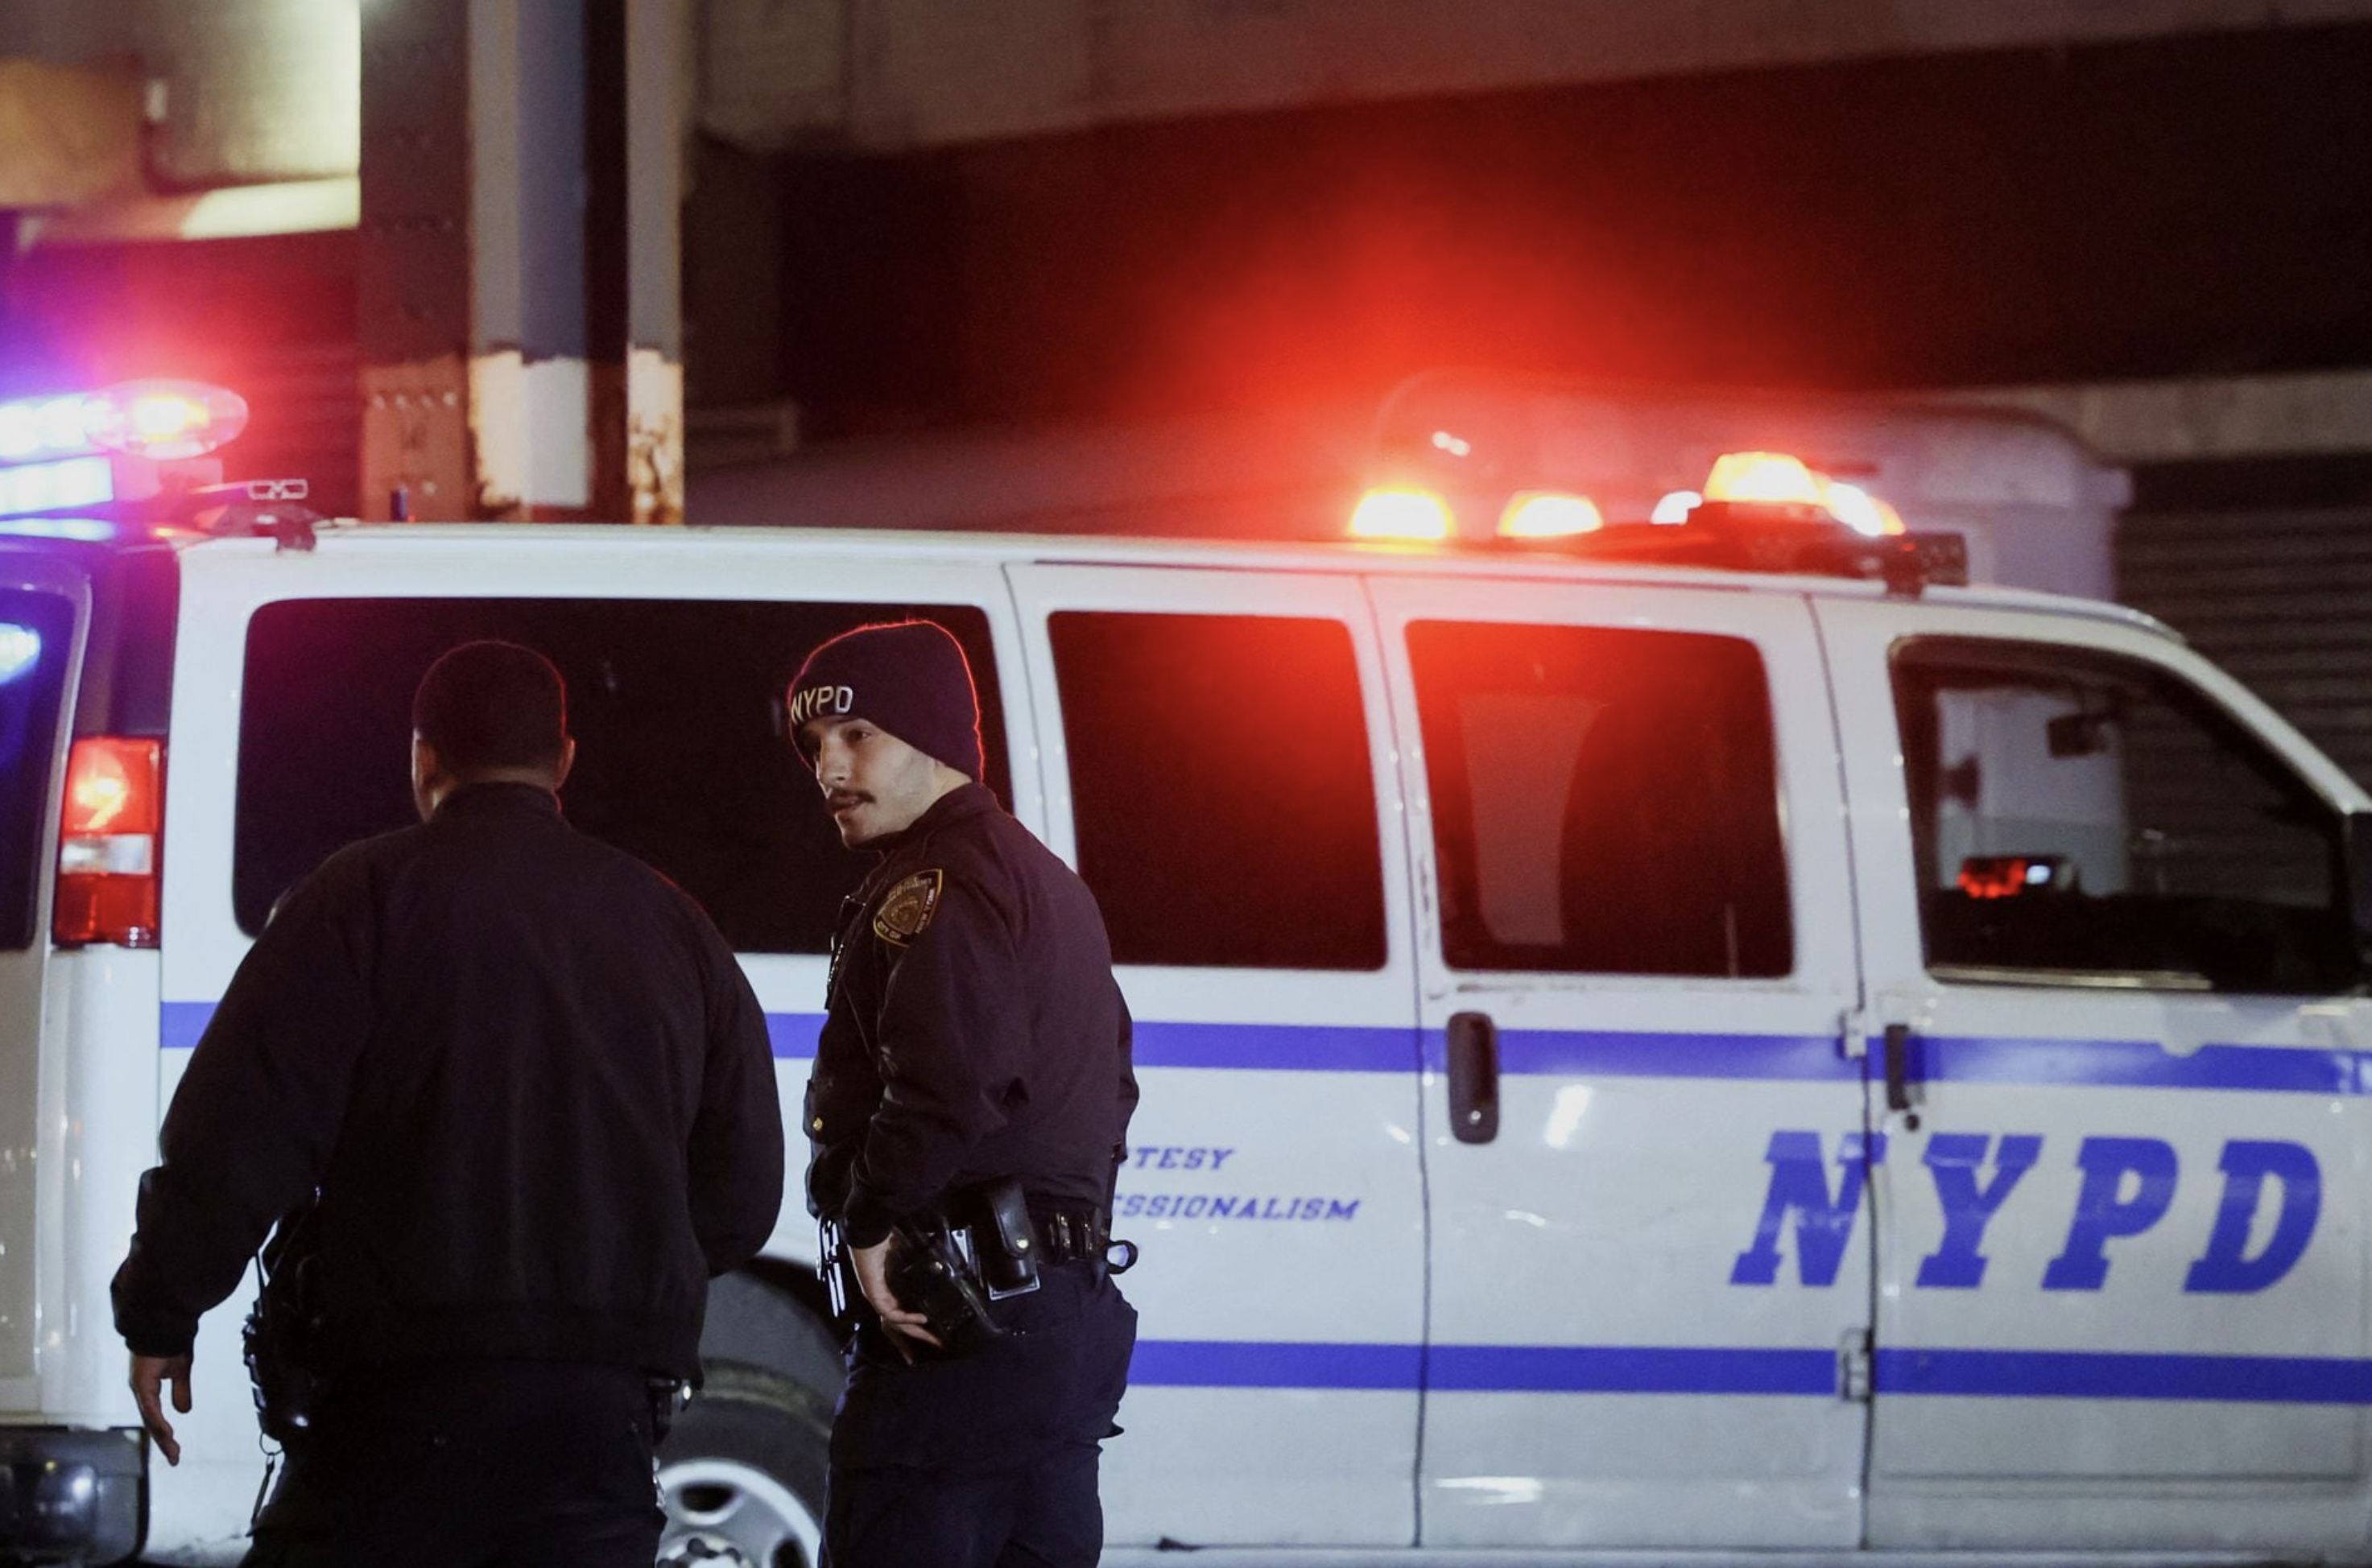 Members of the New York Police Department (NYPD) investigate the scene of a shooting at the Mount Eden subway station in the Bronx borough of New York City, U.S. February 12, 2024. Photo: Reuters